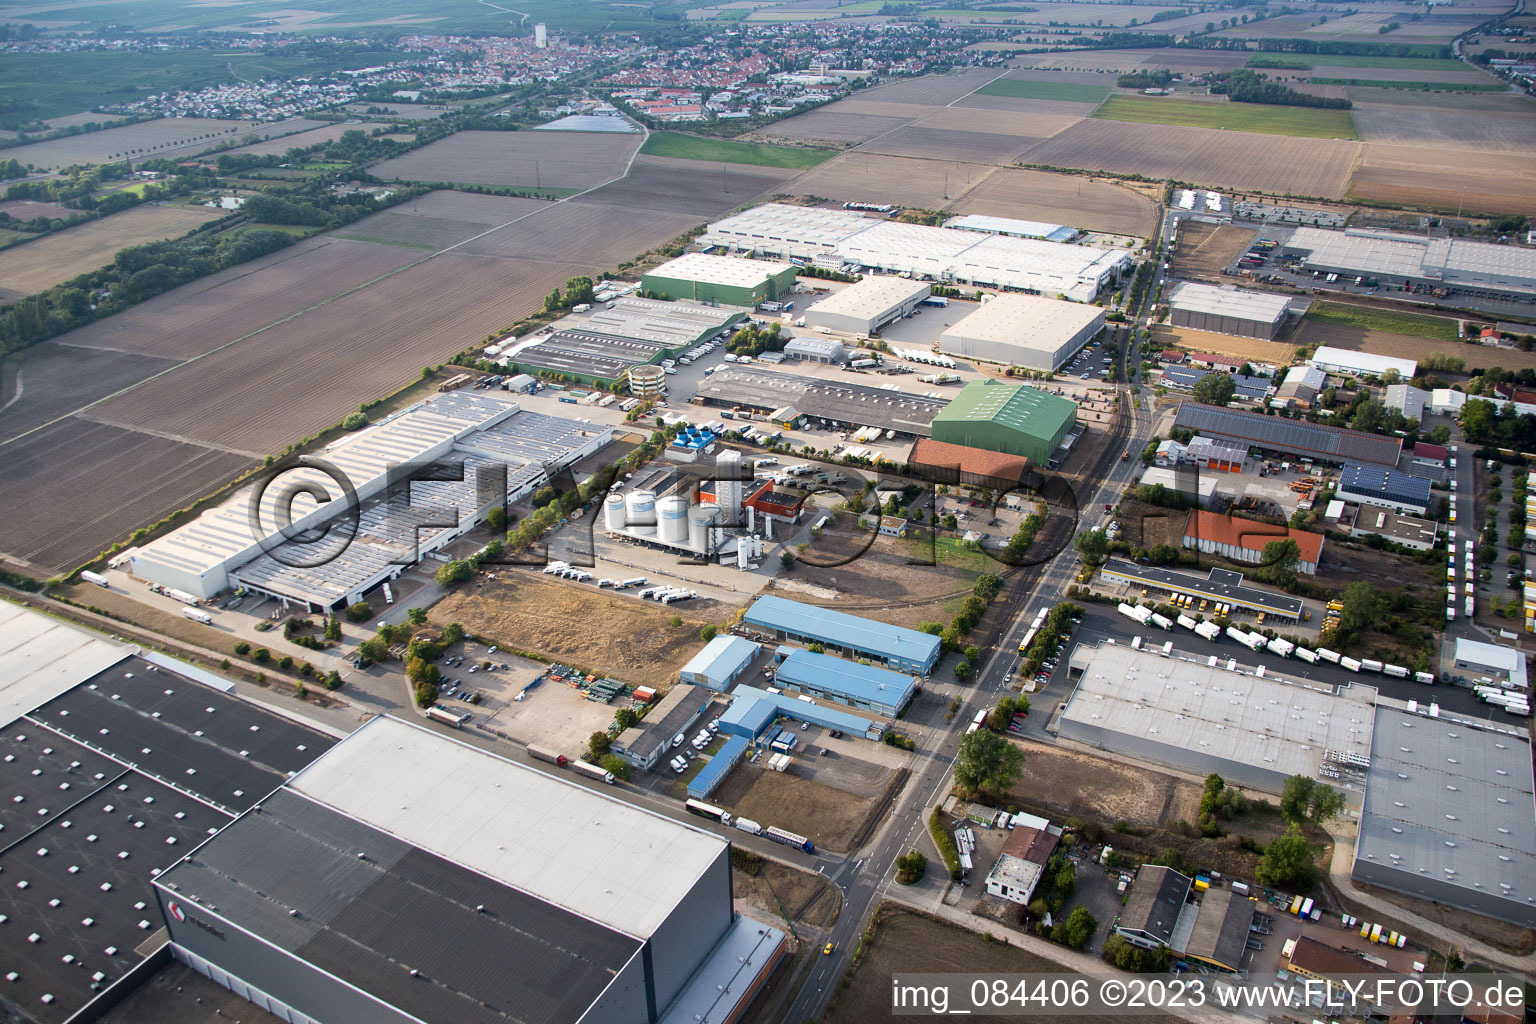 Aerial photograpy of Bosch in the district Rheindürkheim in Worms in the state Rhineland-Palatinate, Germany